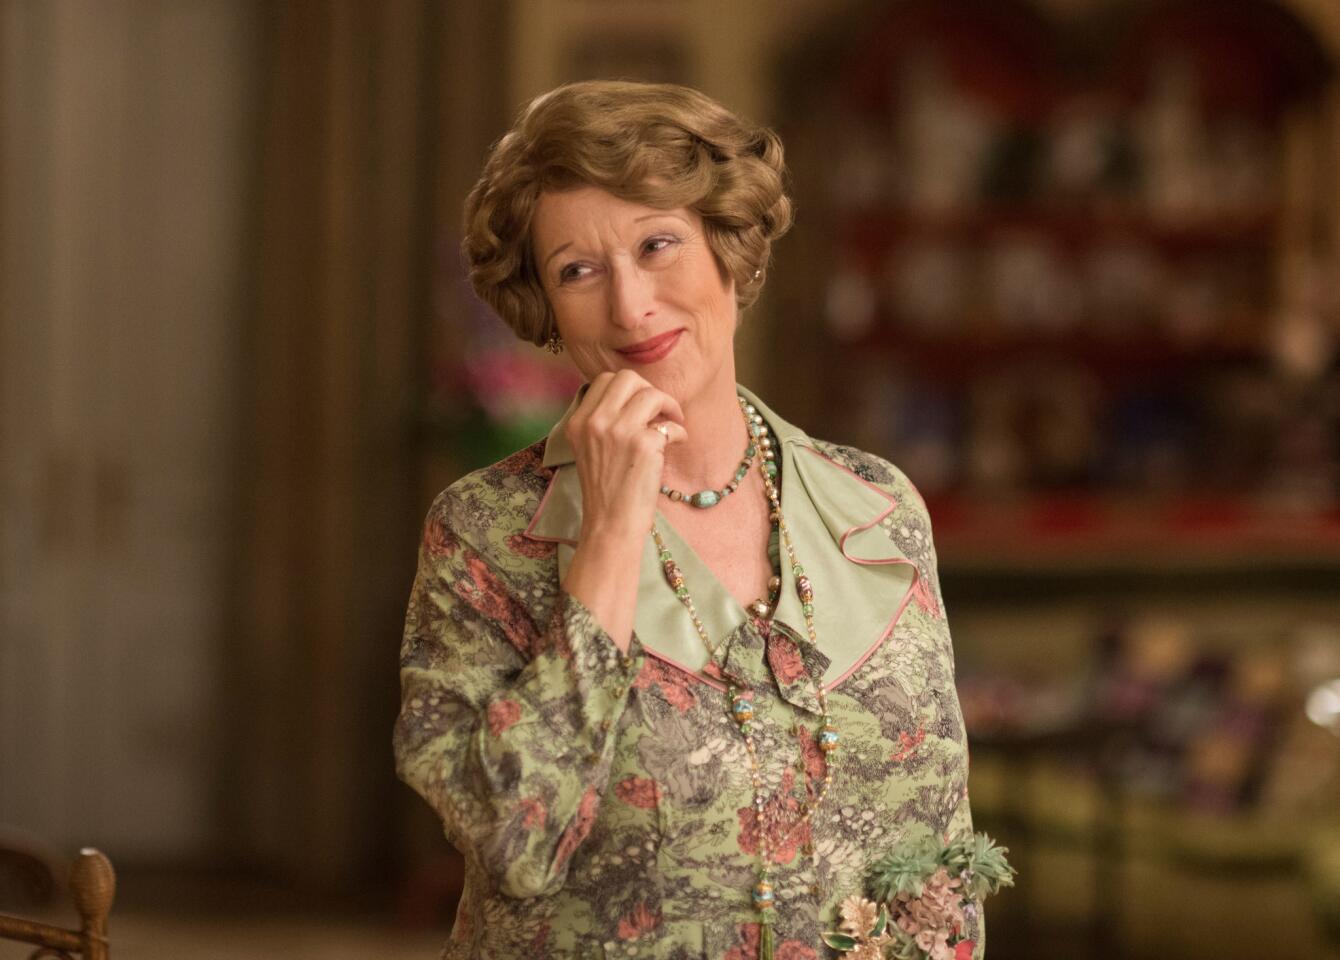 Most recently, Streep was nominated for a SAG award and a Golden Globe for her role in "Florence Foster Jenkins."